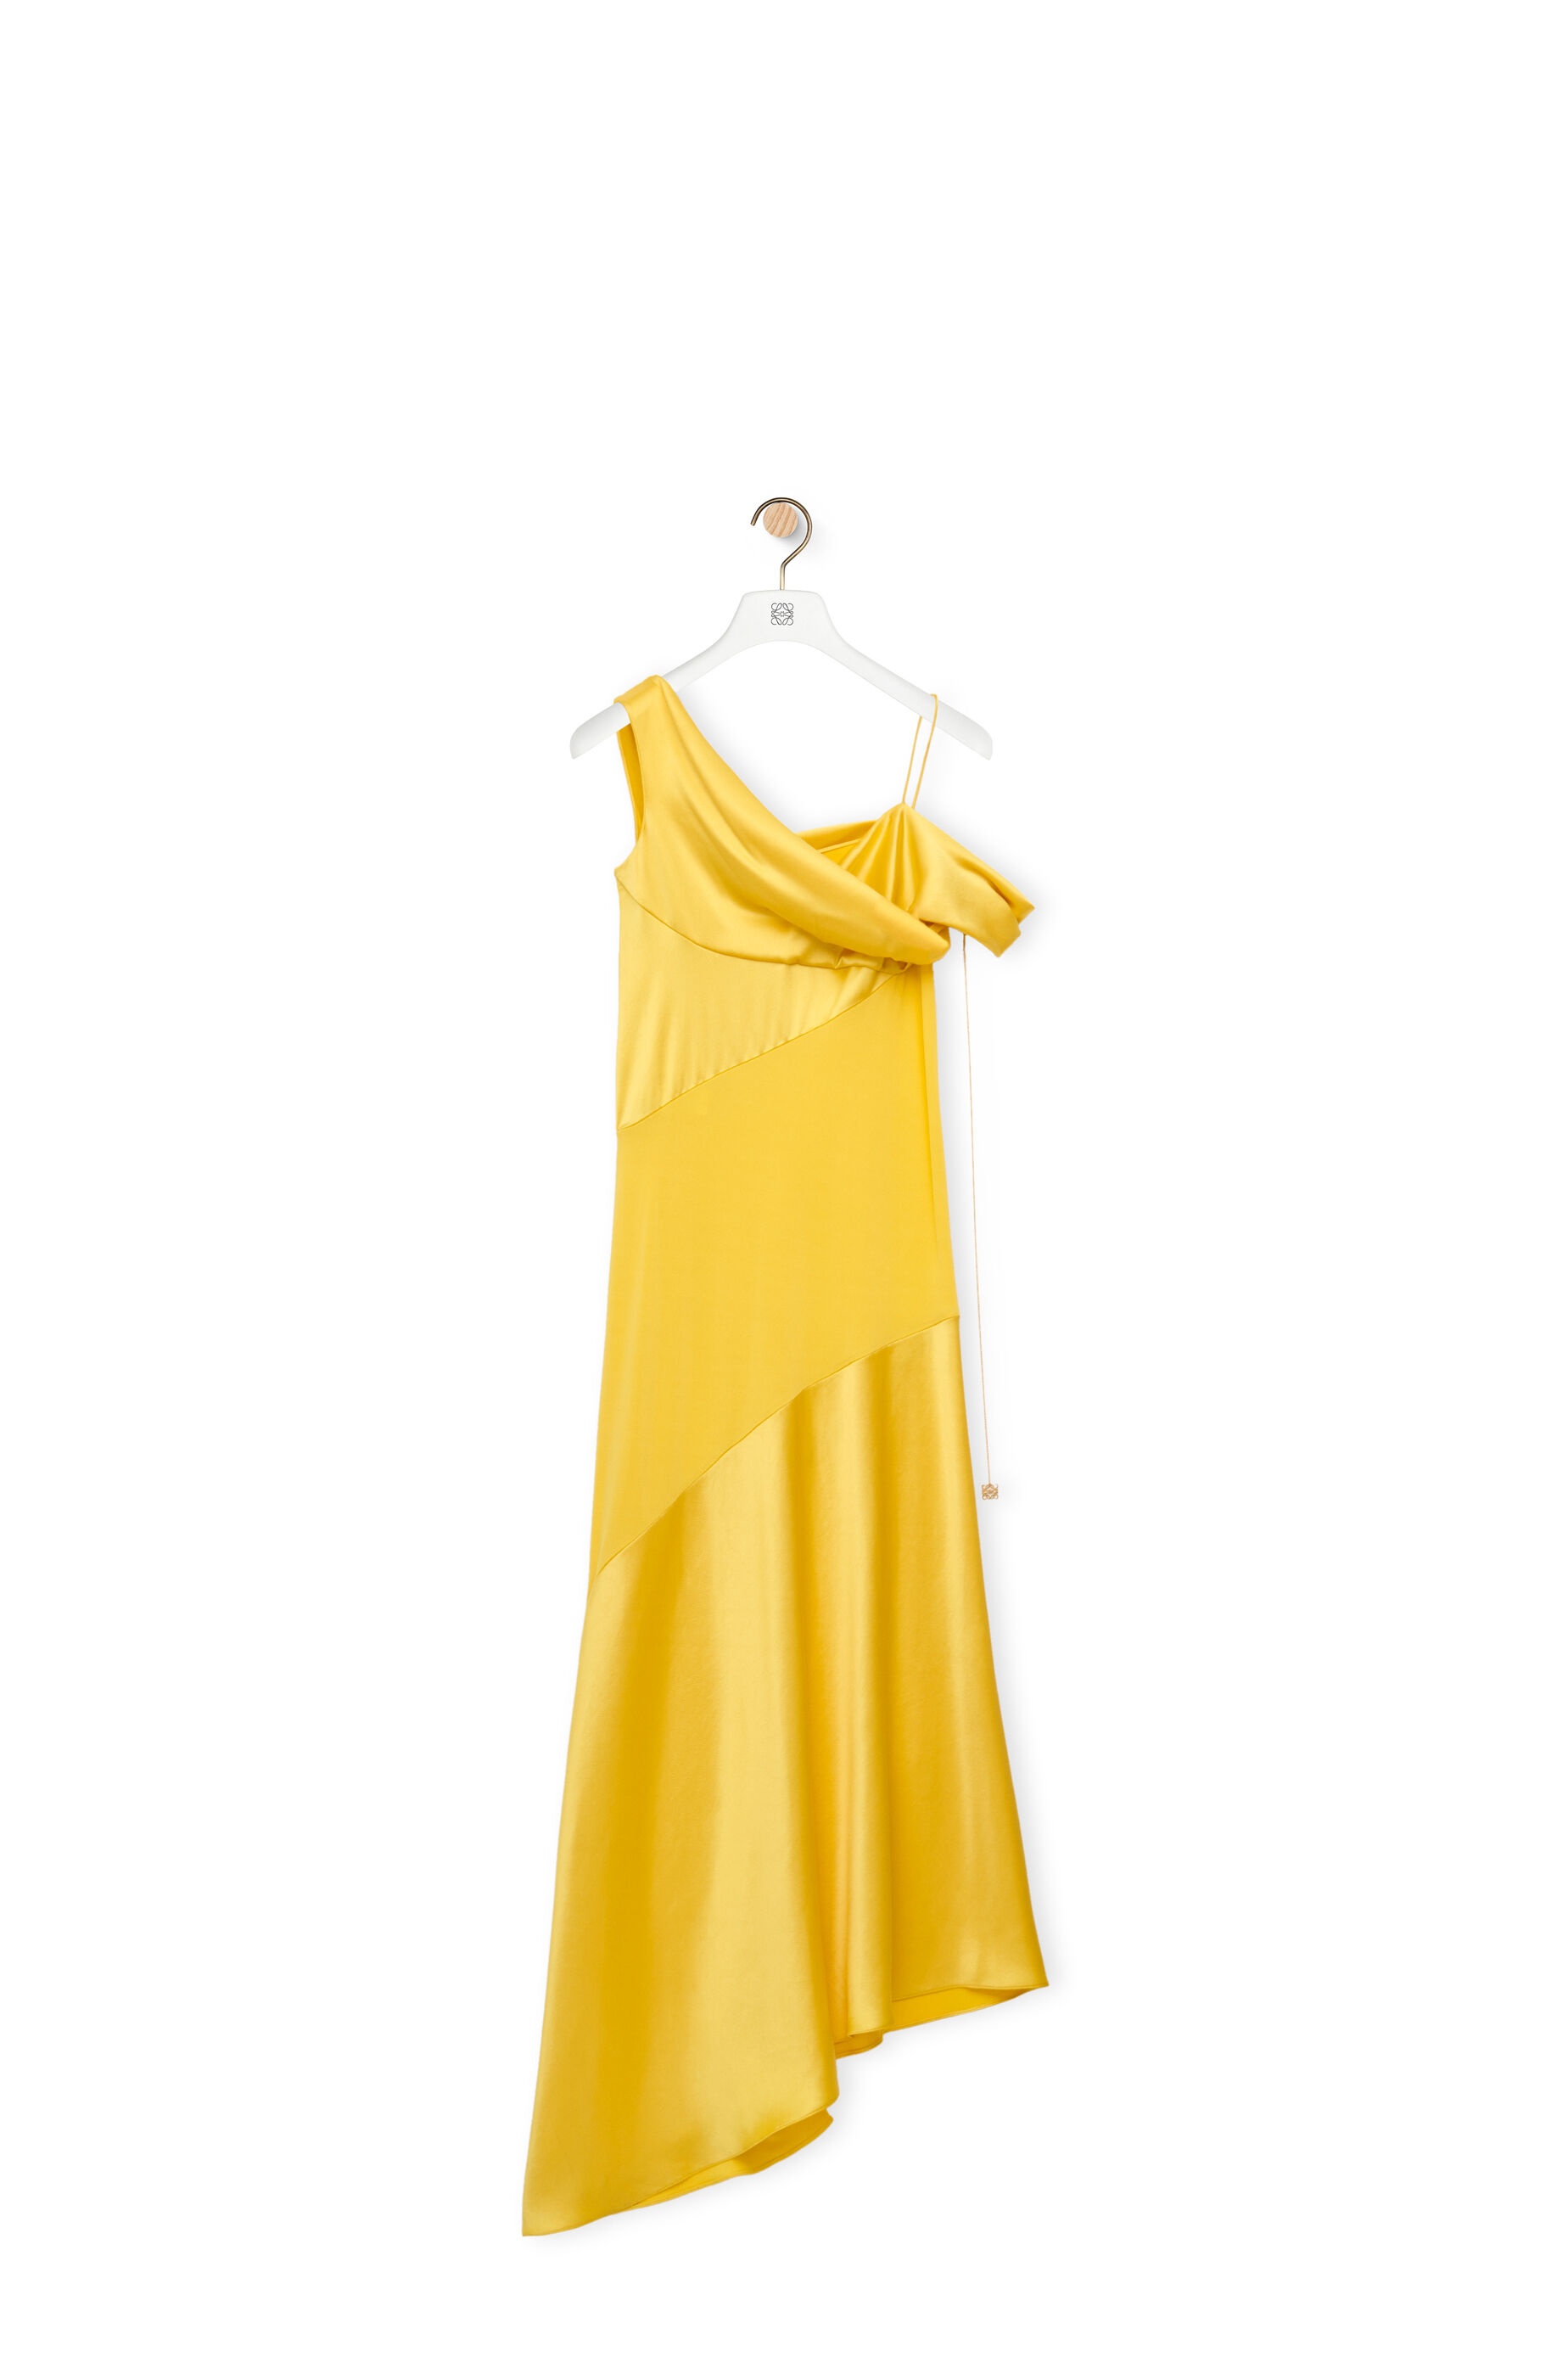 Draped dress in satin and crepe jersey - 1